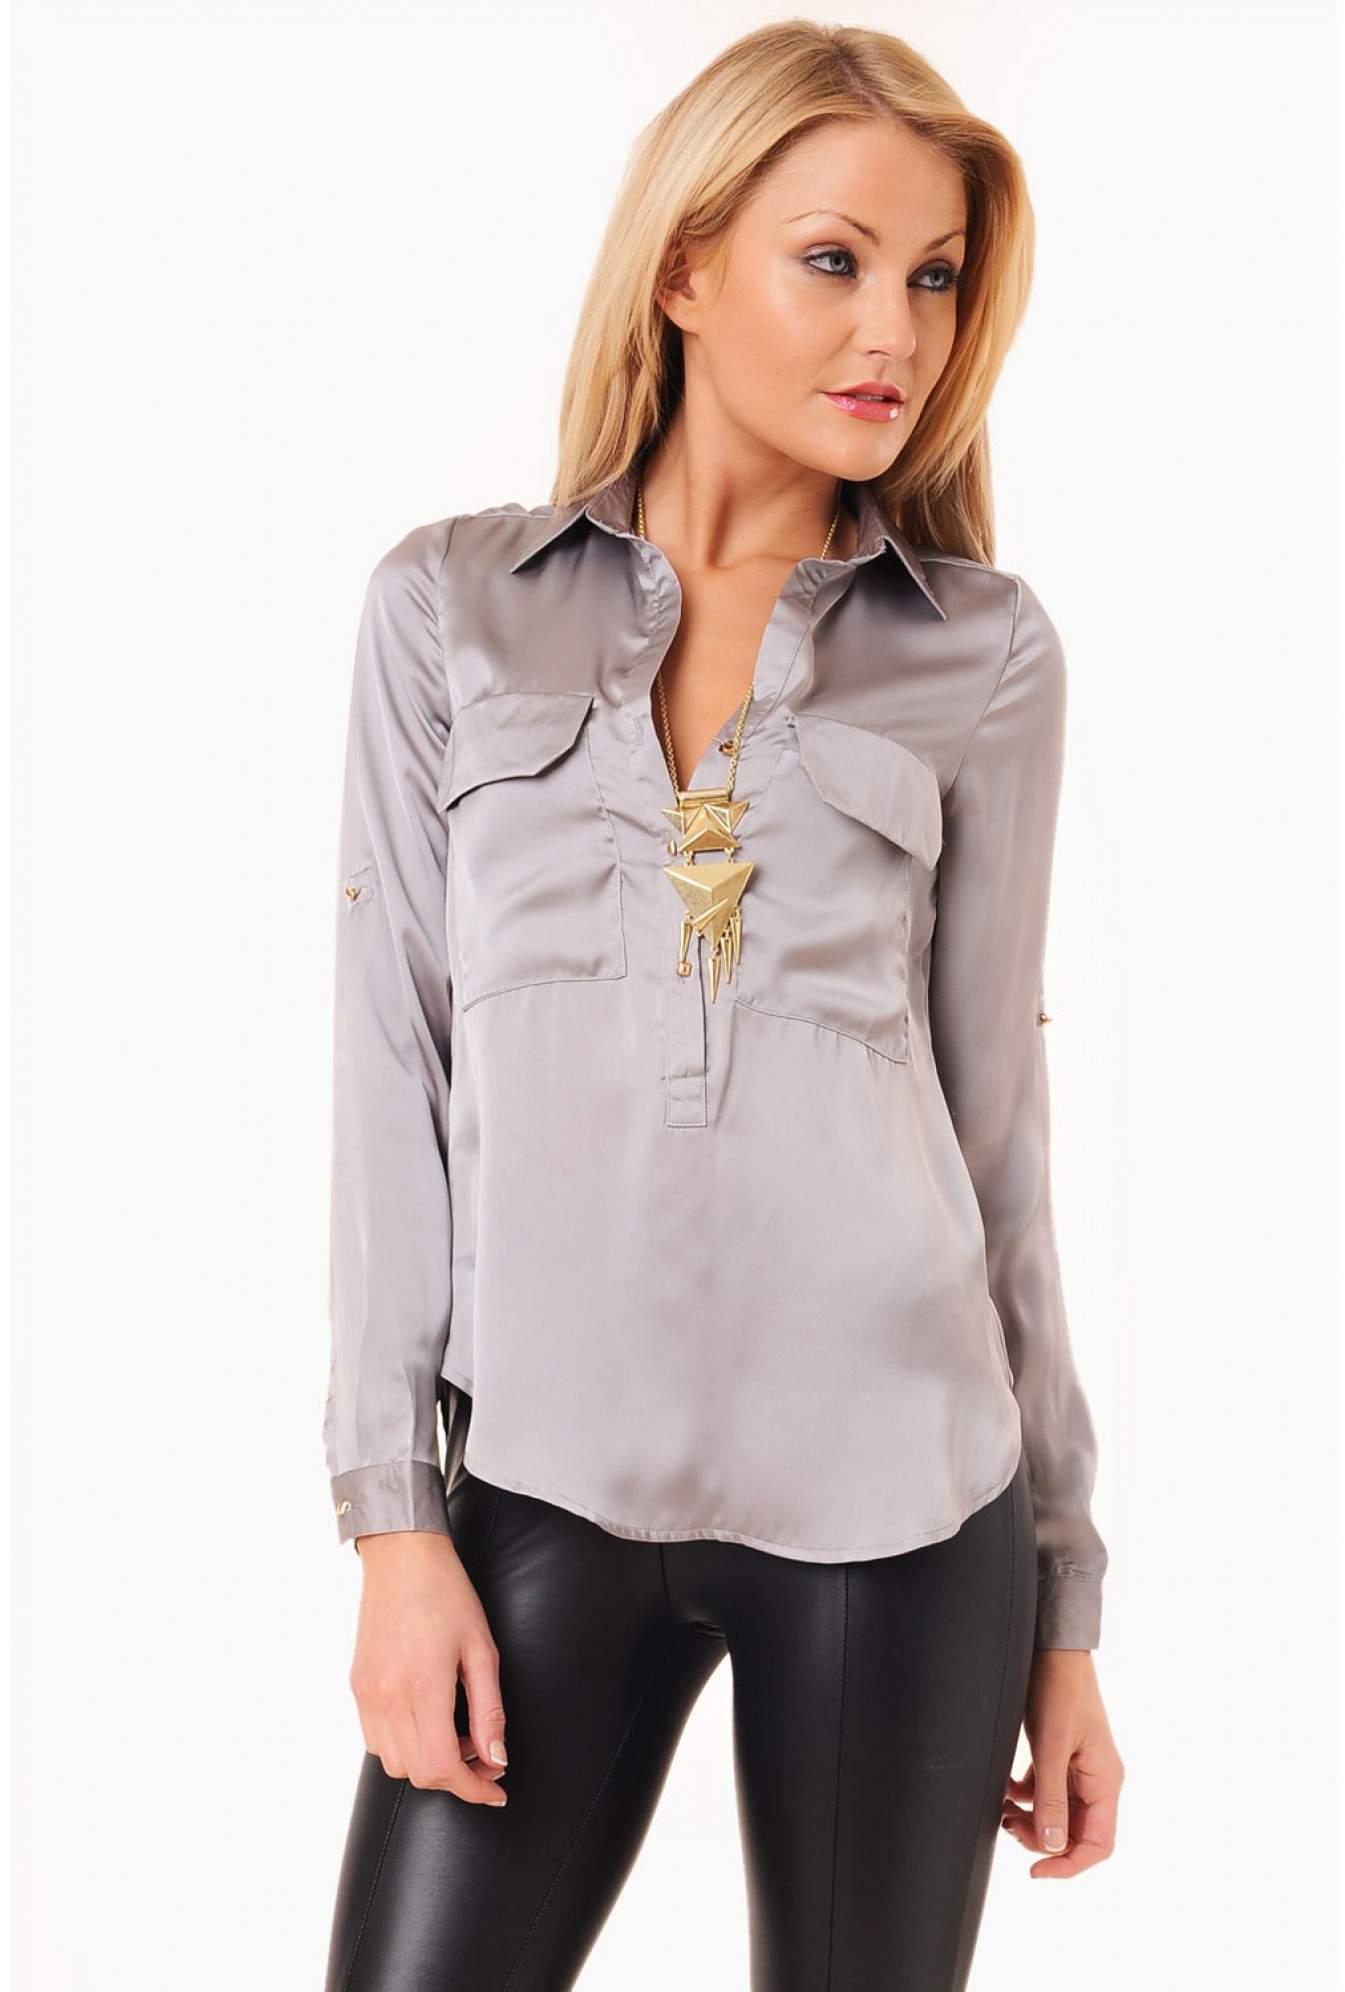 Maisy Satin Blouse in Silver | iCLOTHING